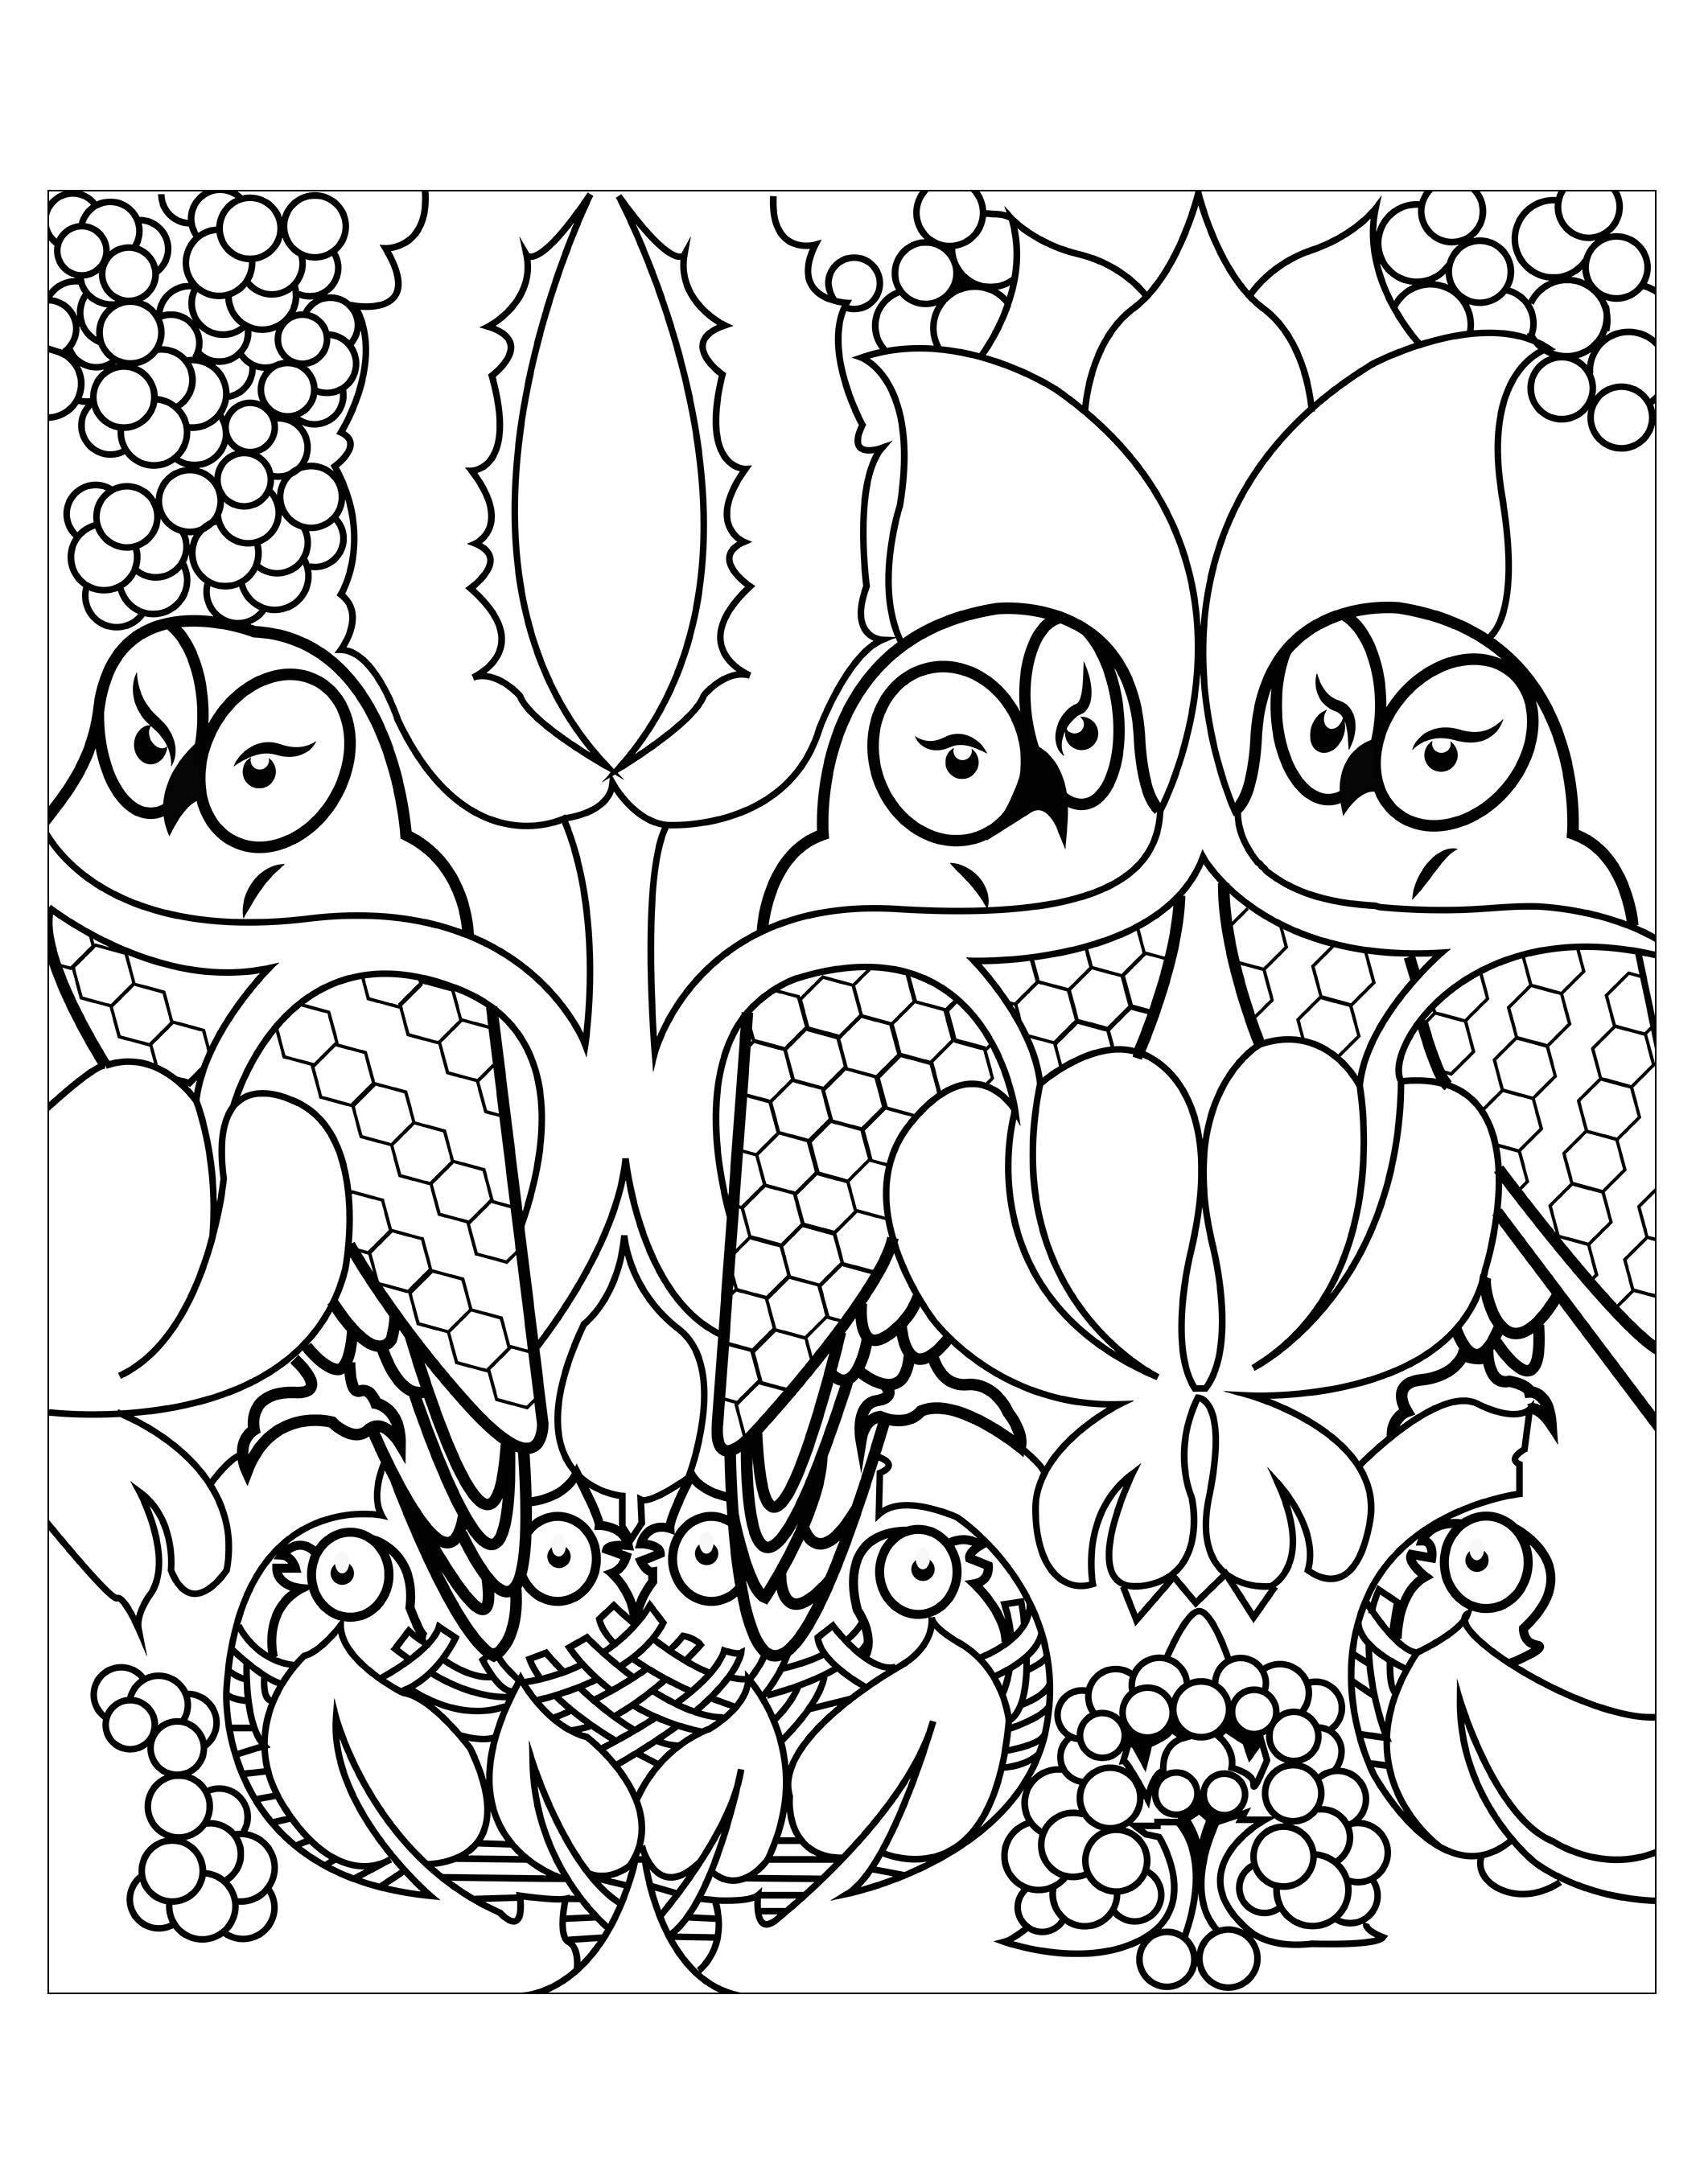 Cute owls - Owls Adult Coloring Pages